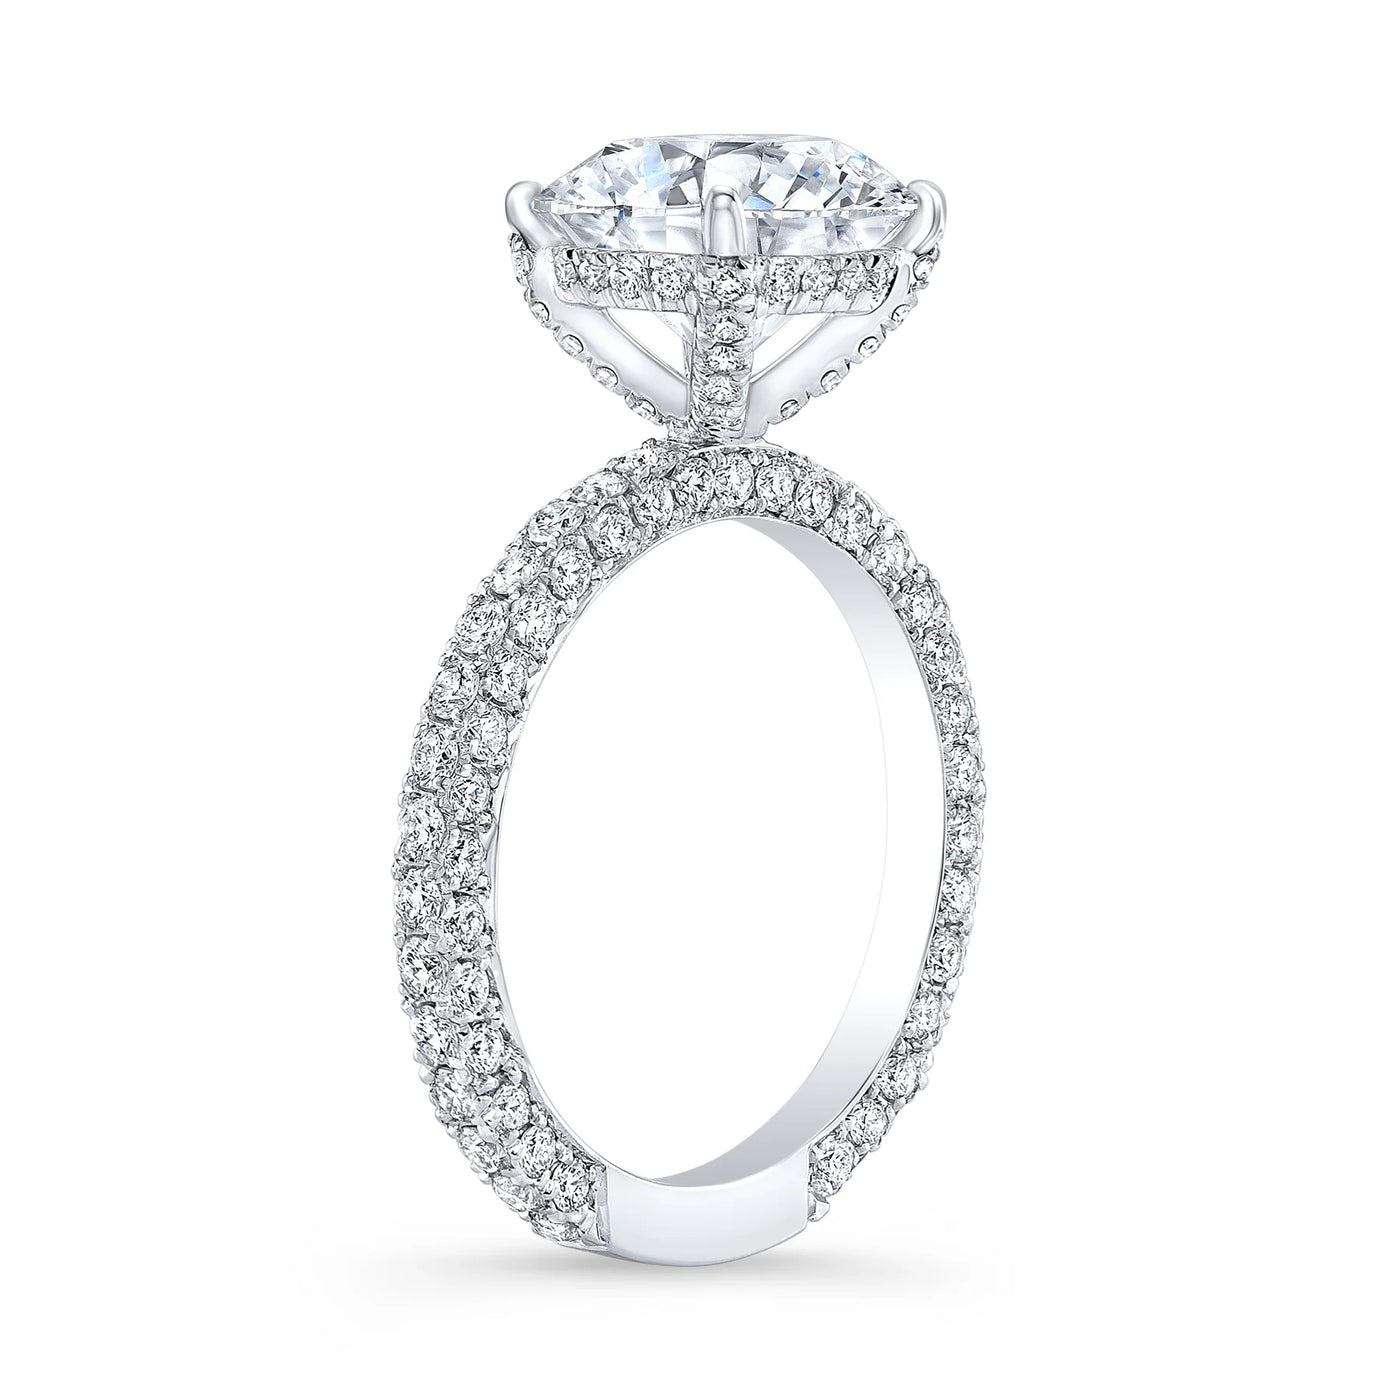 Pave' - Round Engagement Ring